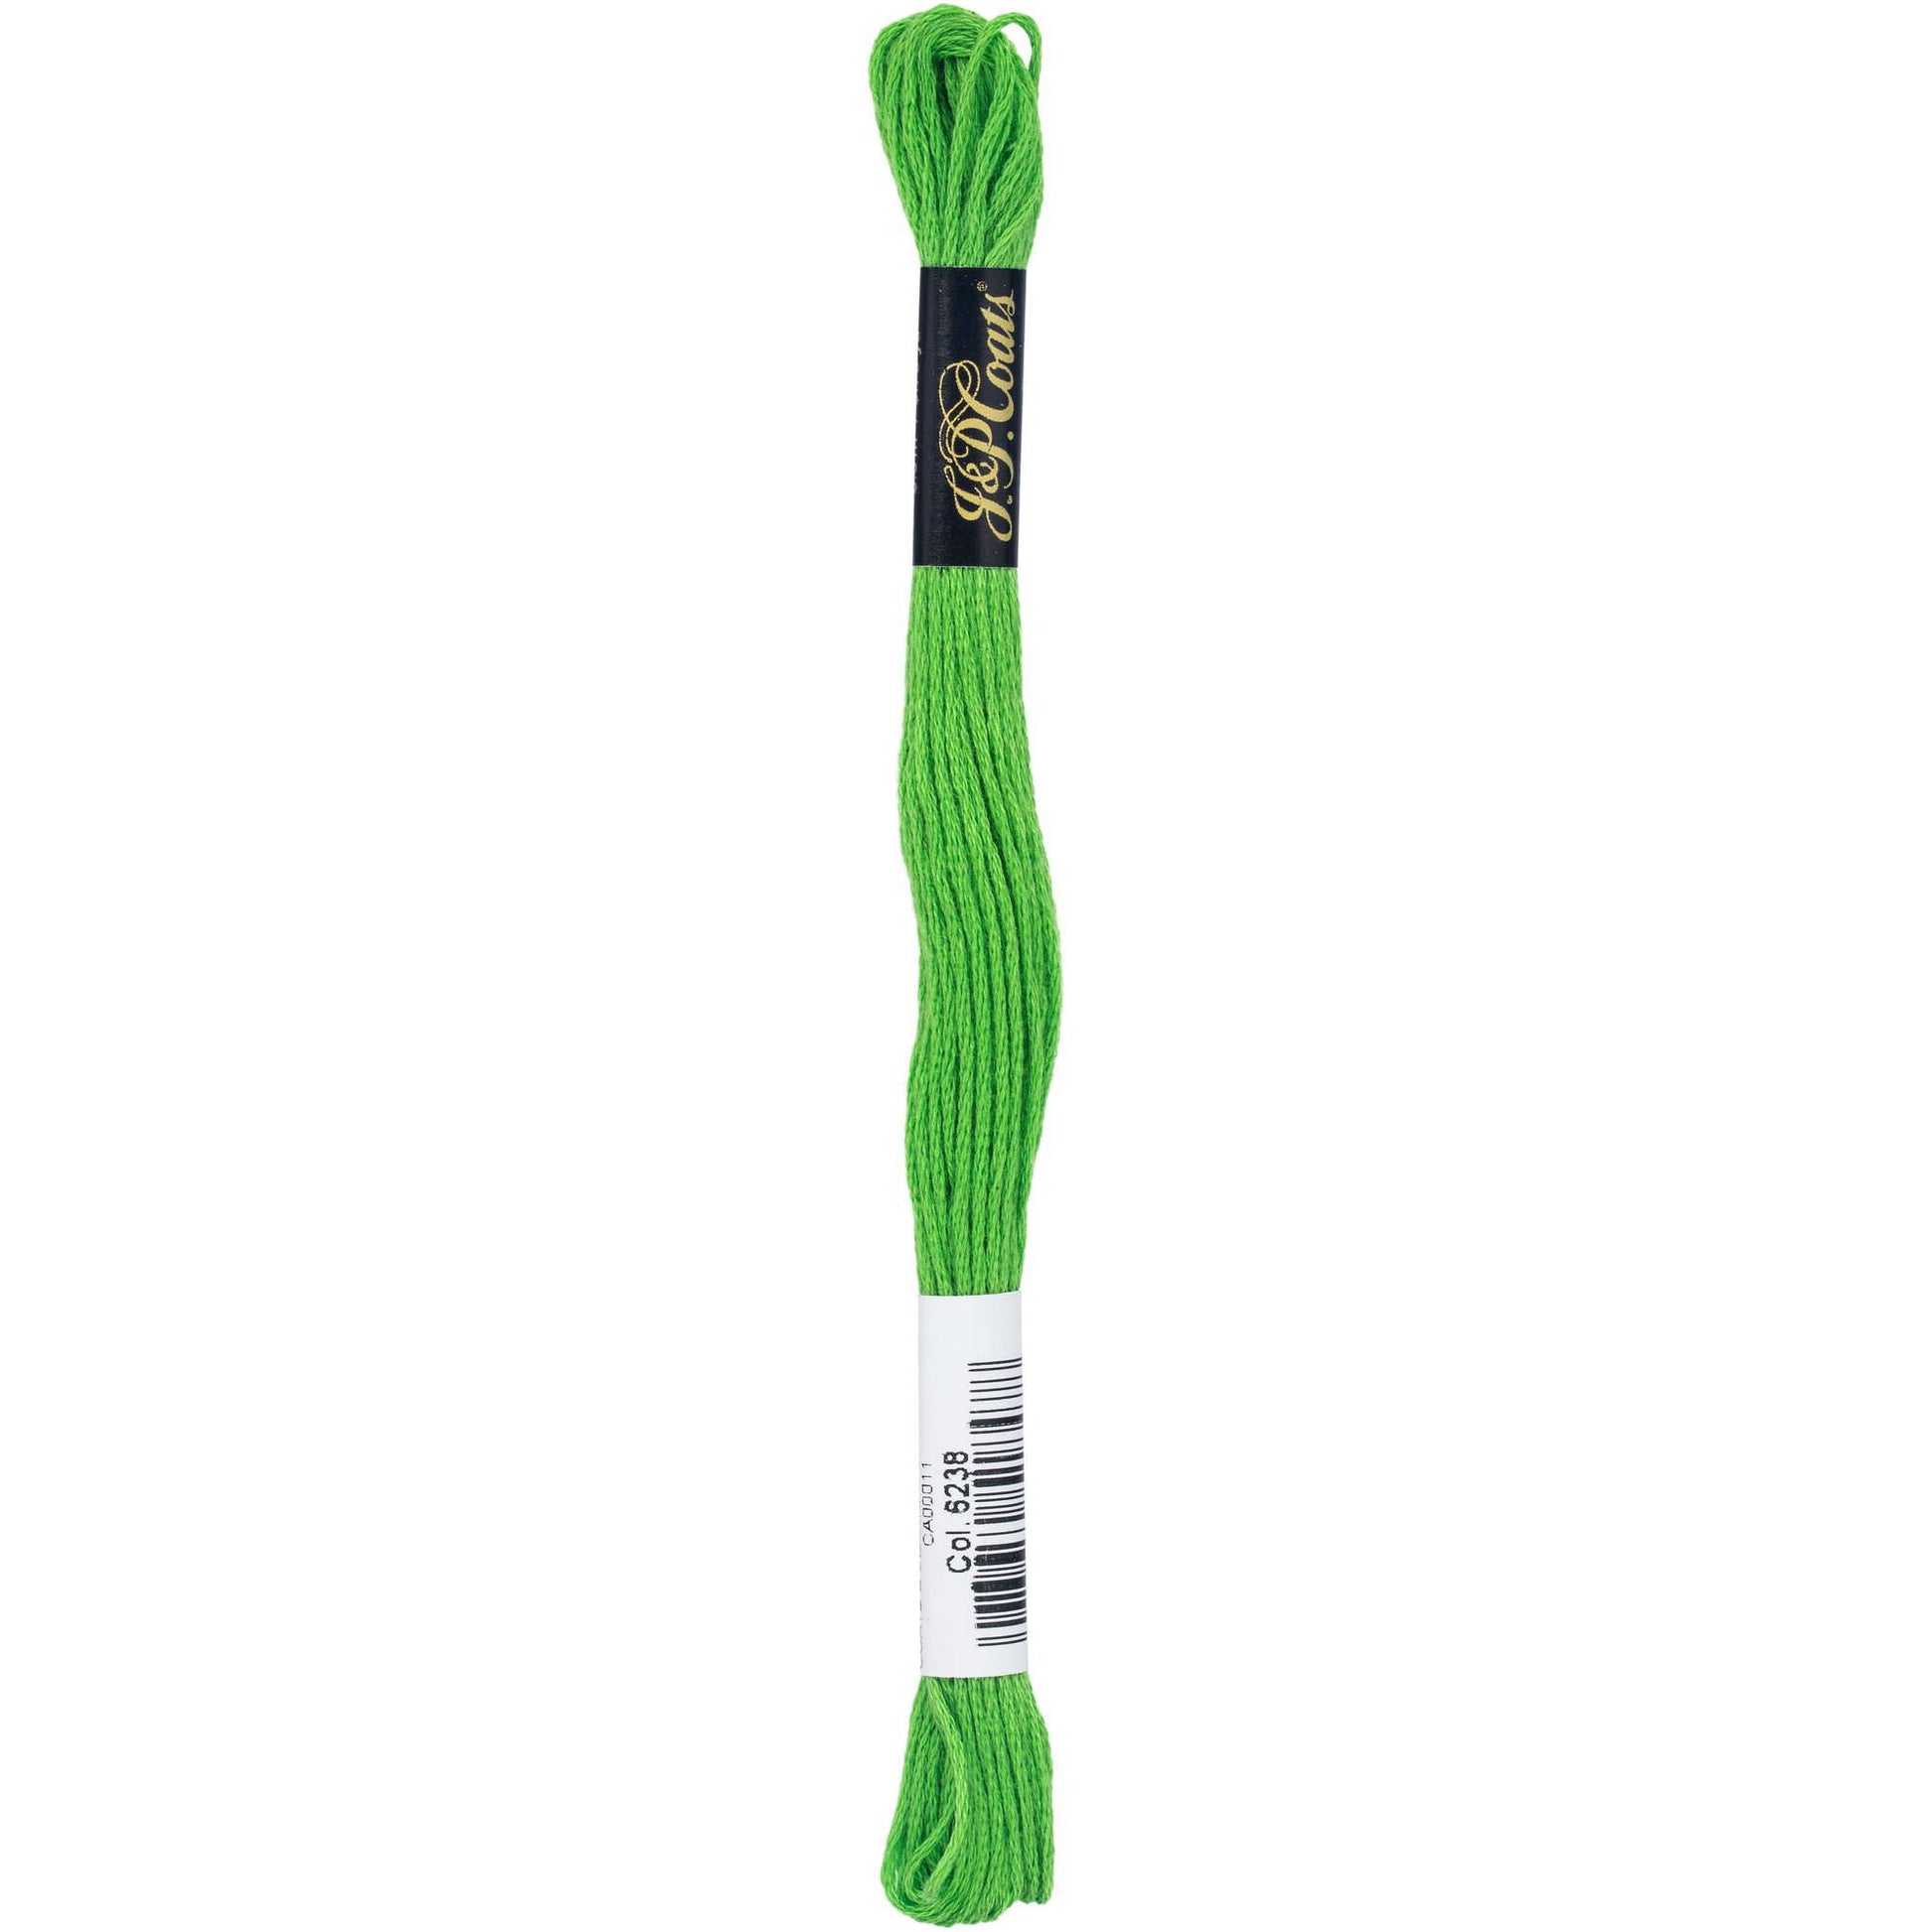 Coats & Clark Cotton Embroidery Floss Chartreuse Bright